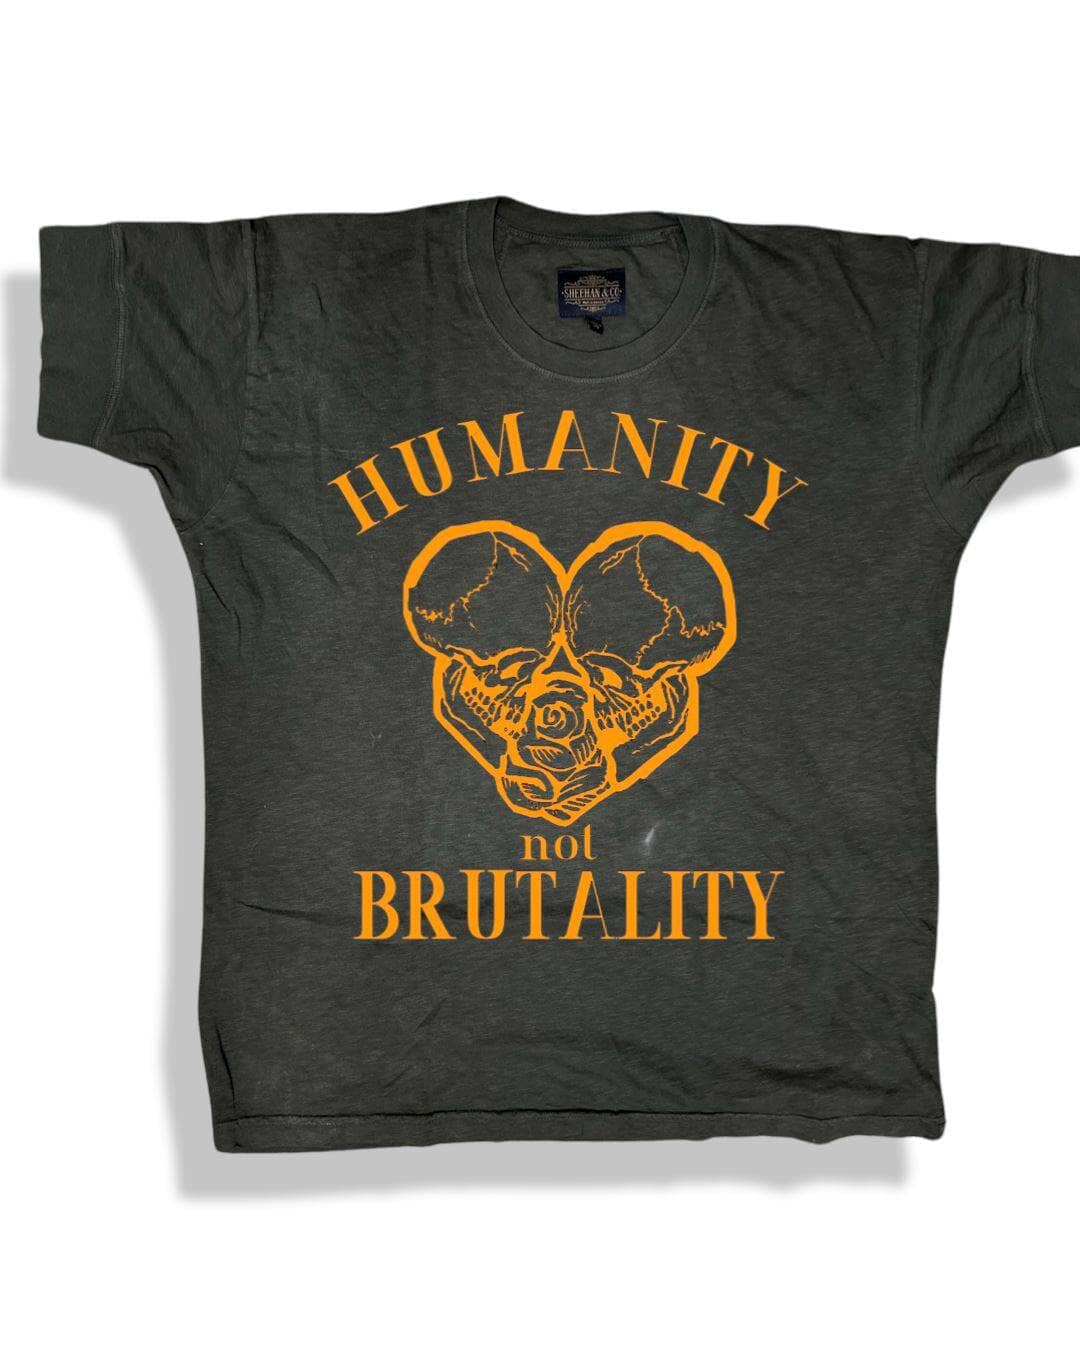 Humanity not Brutality Skull Heart Graphic Statement Tee Sheehan&Co - Sheehan and Co.